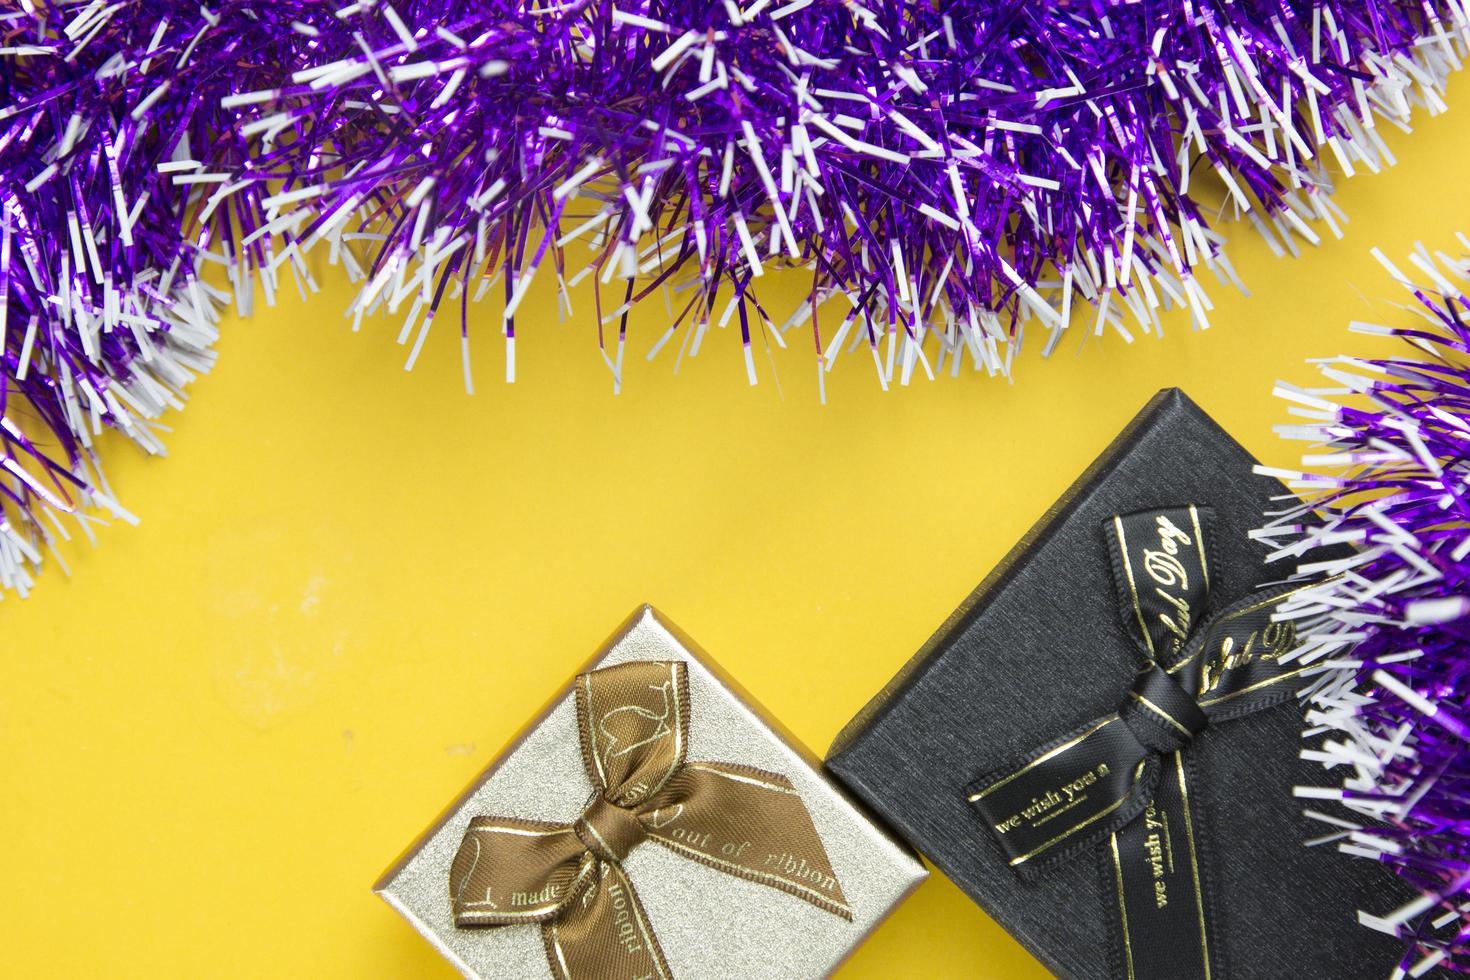 Two gift boxes and purple ribbons decorative festive object place on yellow background, nice new year decorective object concepts design. photo